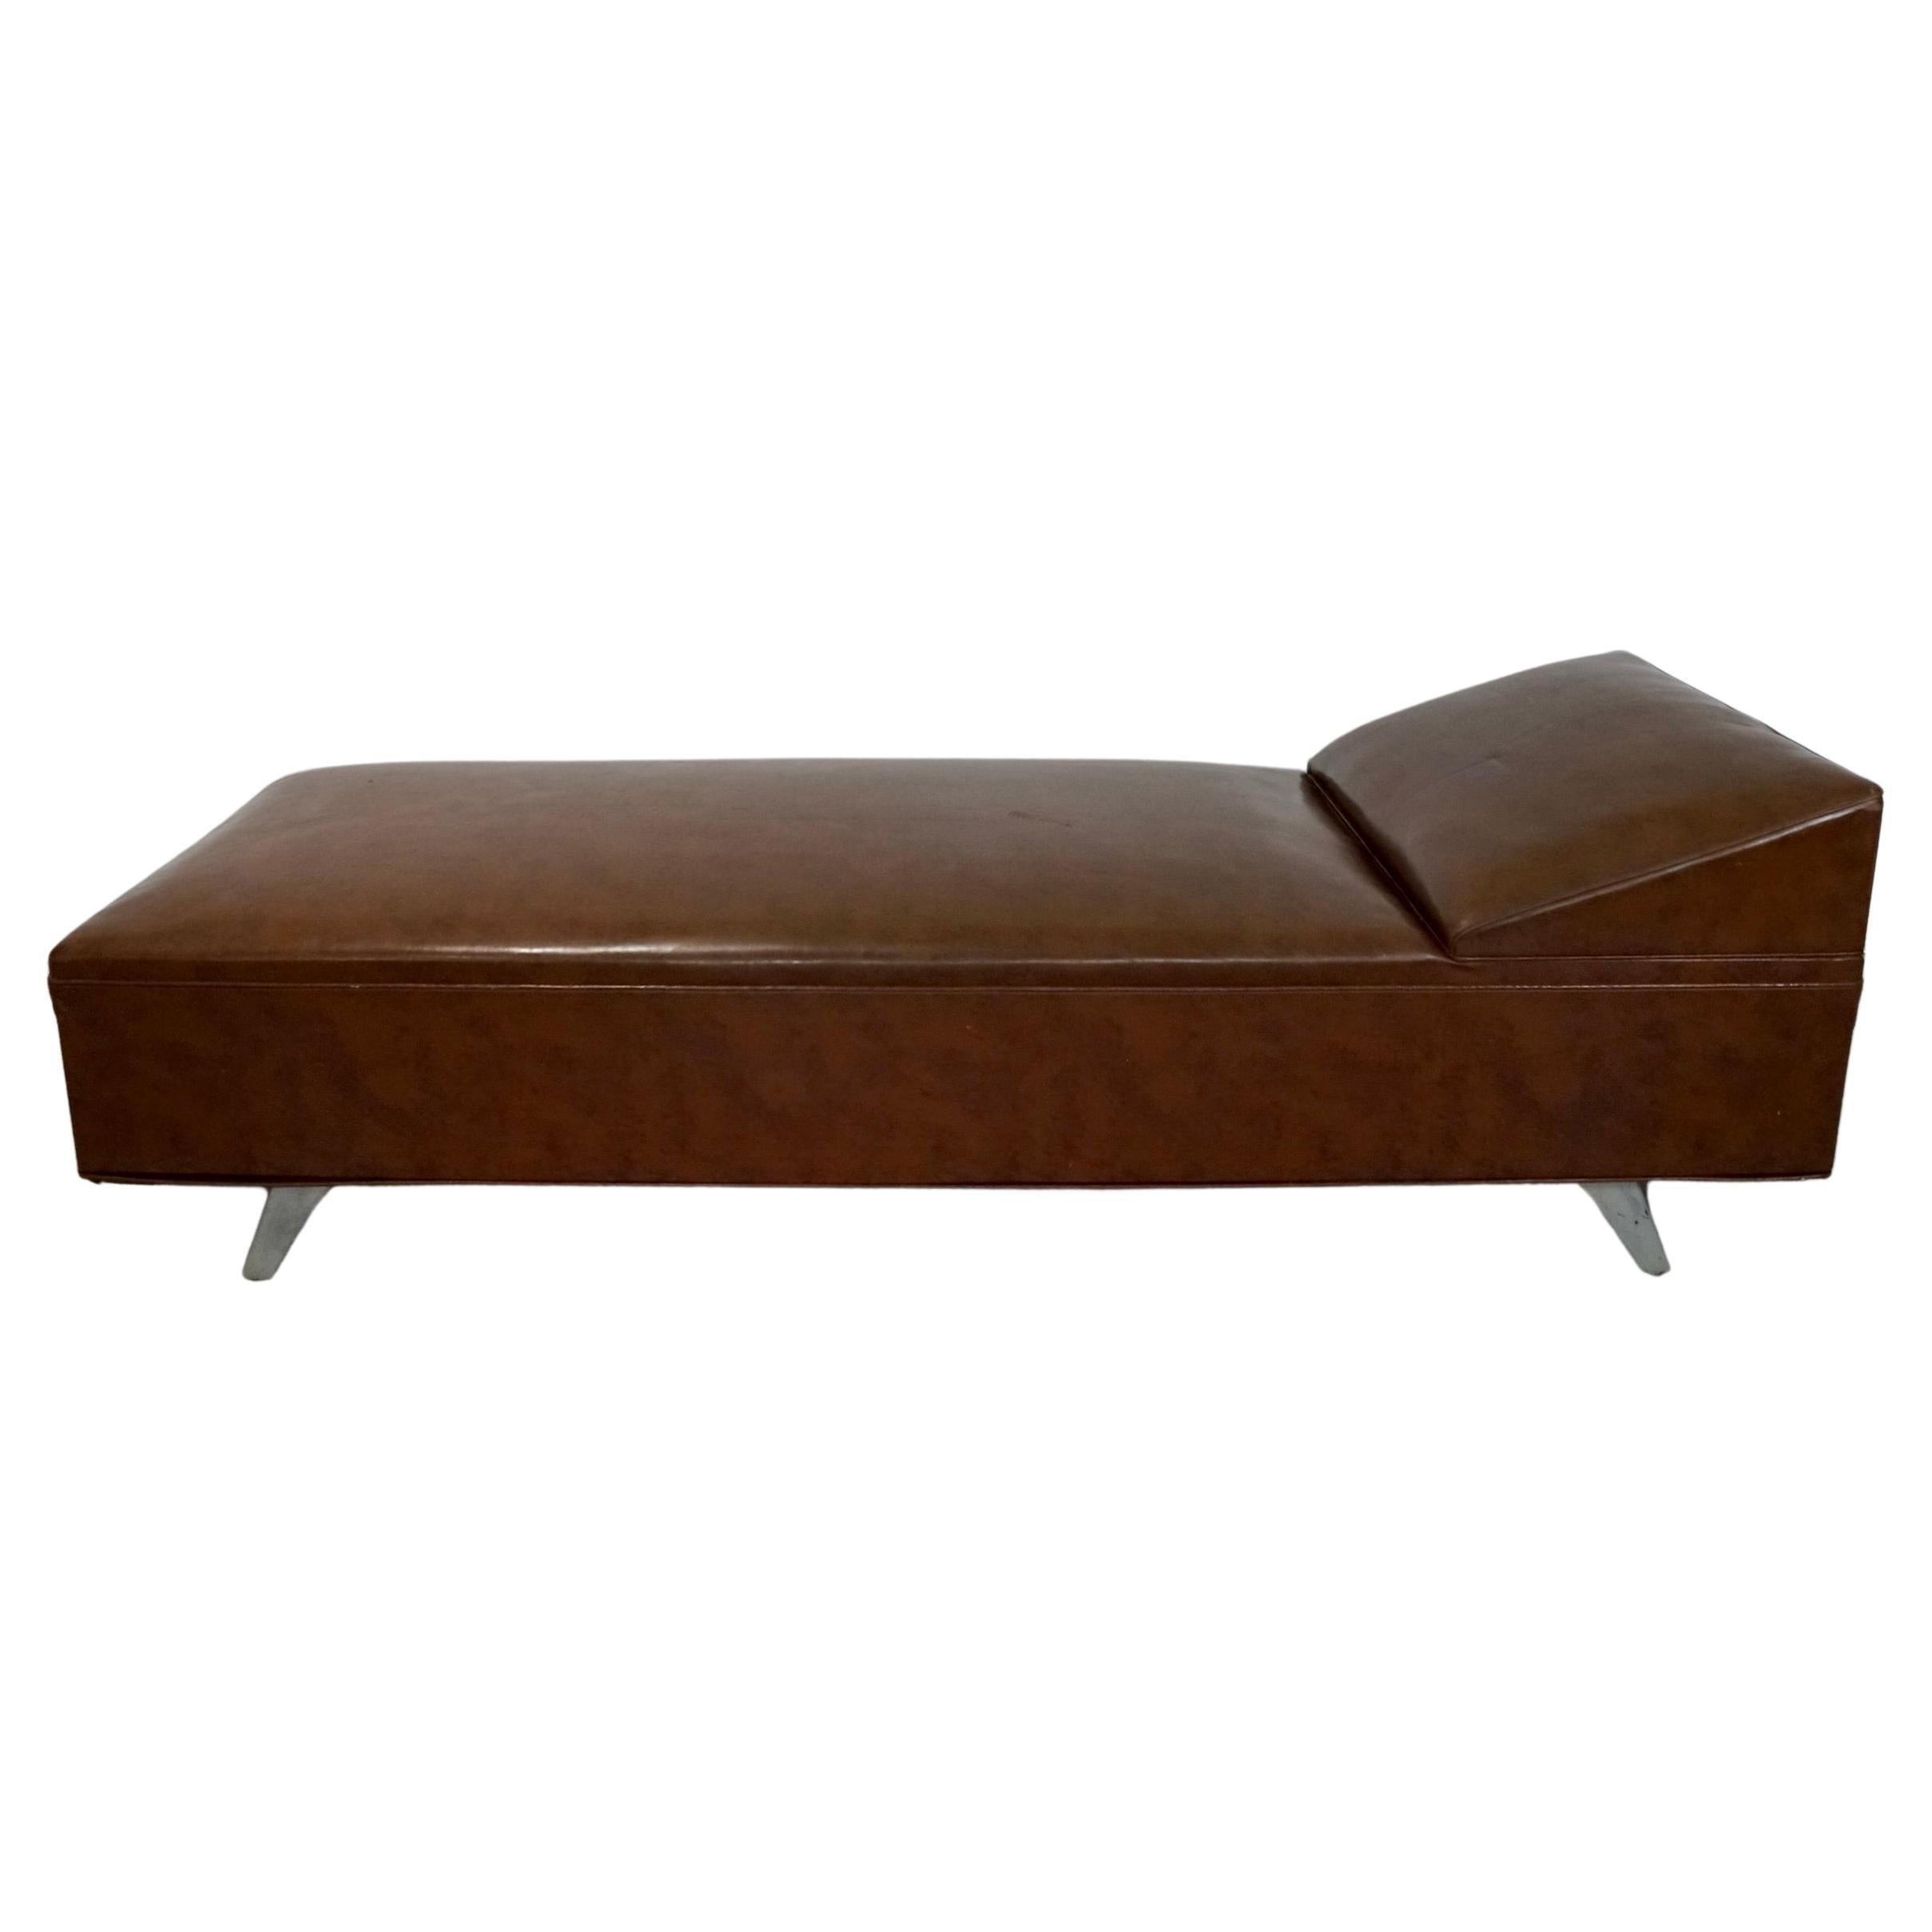 1940's Industrial Era Mid-Century Modern Royal Metal Daybed For Sale